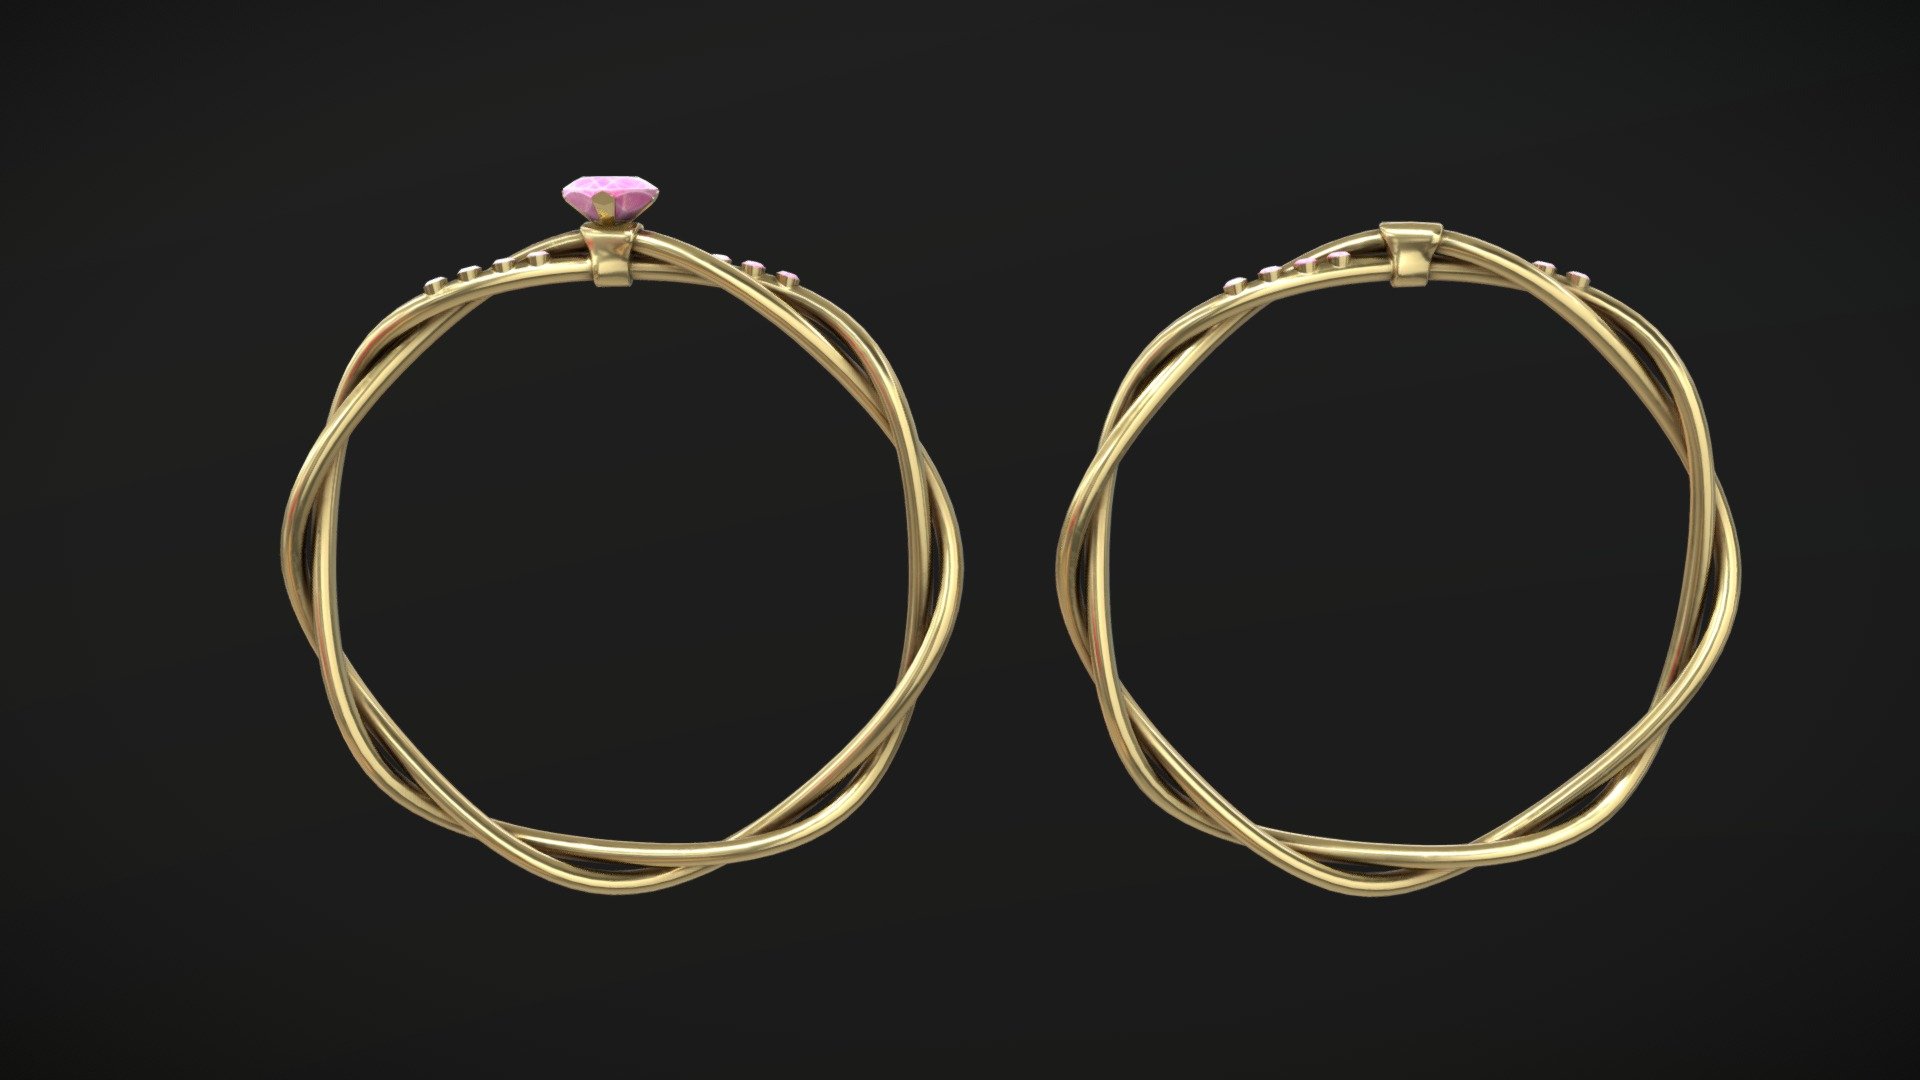 Twisted rings

I made them in Blender (modeling and unwarping) then baked and textured them in Substance Painter 3d model